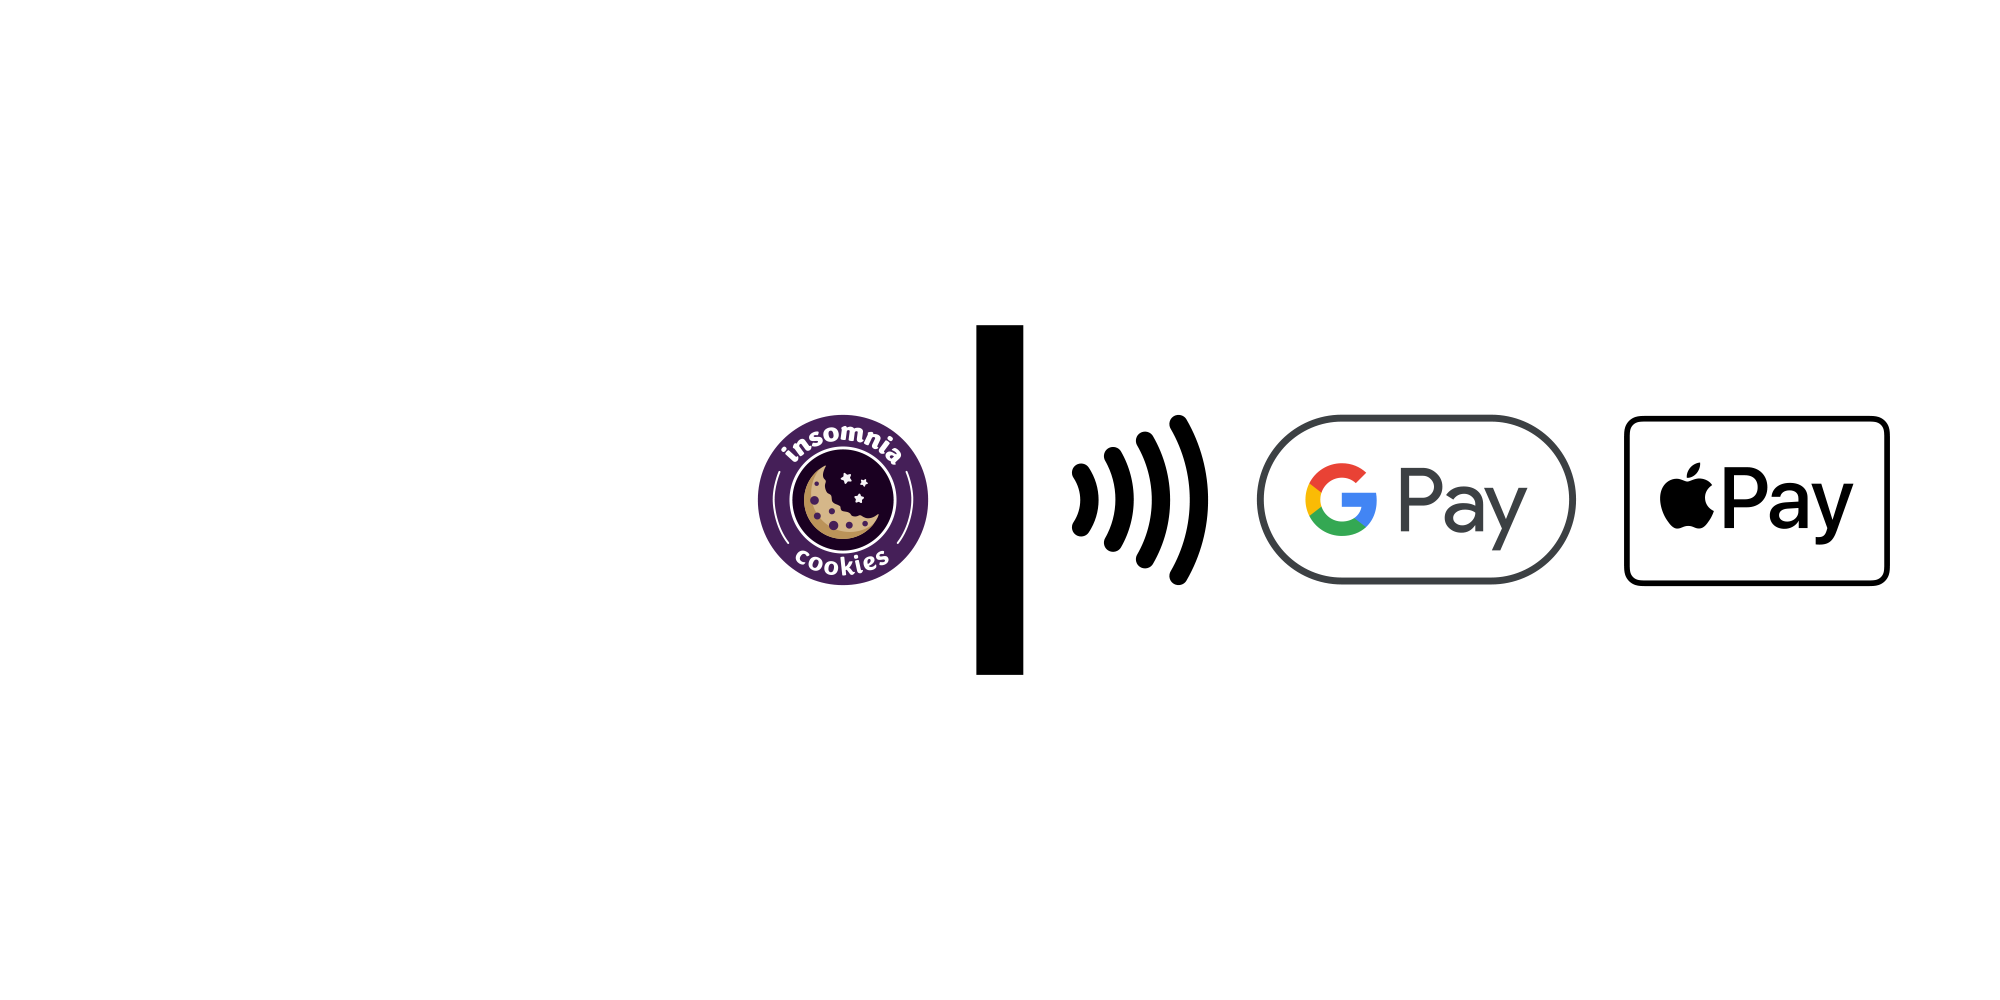 Insomnia Cookies accepts contactless payments, as well as Google Pay in-app/online & Apple Pay online.